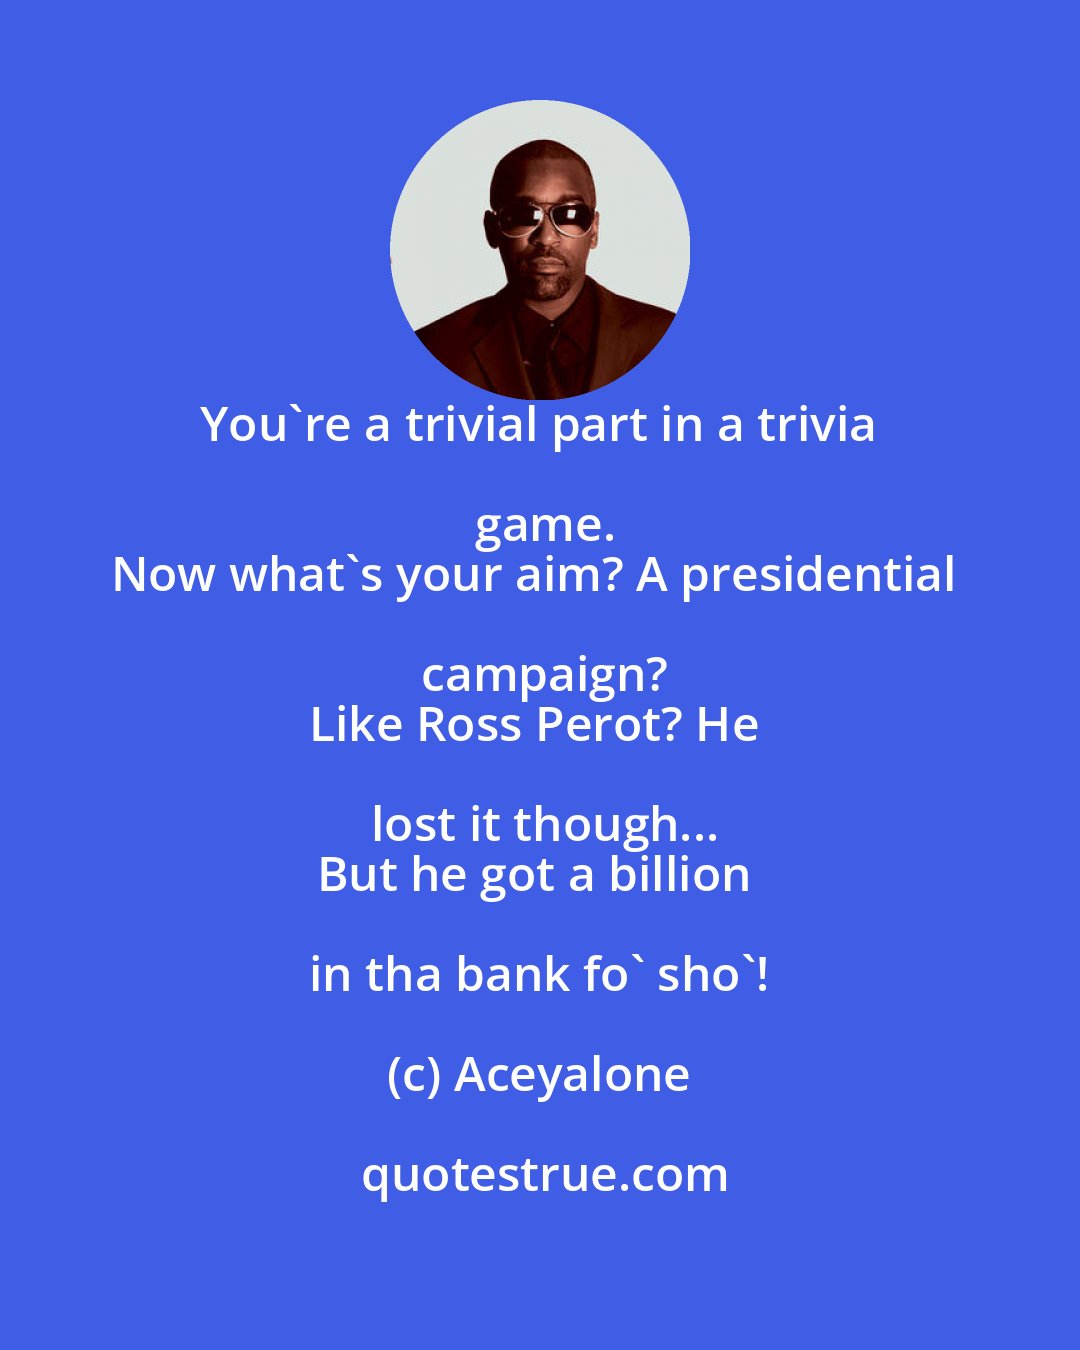 Aceyalone: You're a trivial part in a trivia game.
Now what's your aim? A presidential campaign?
Like Ross Perot? He lost it though...
But he got a billion in tha bank fo' sho'!